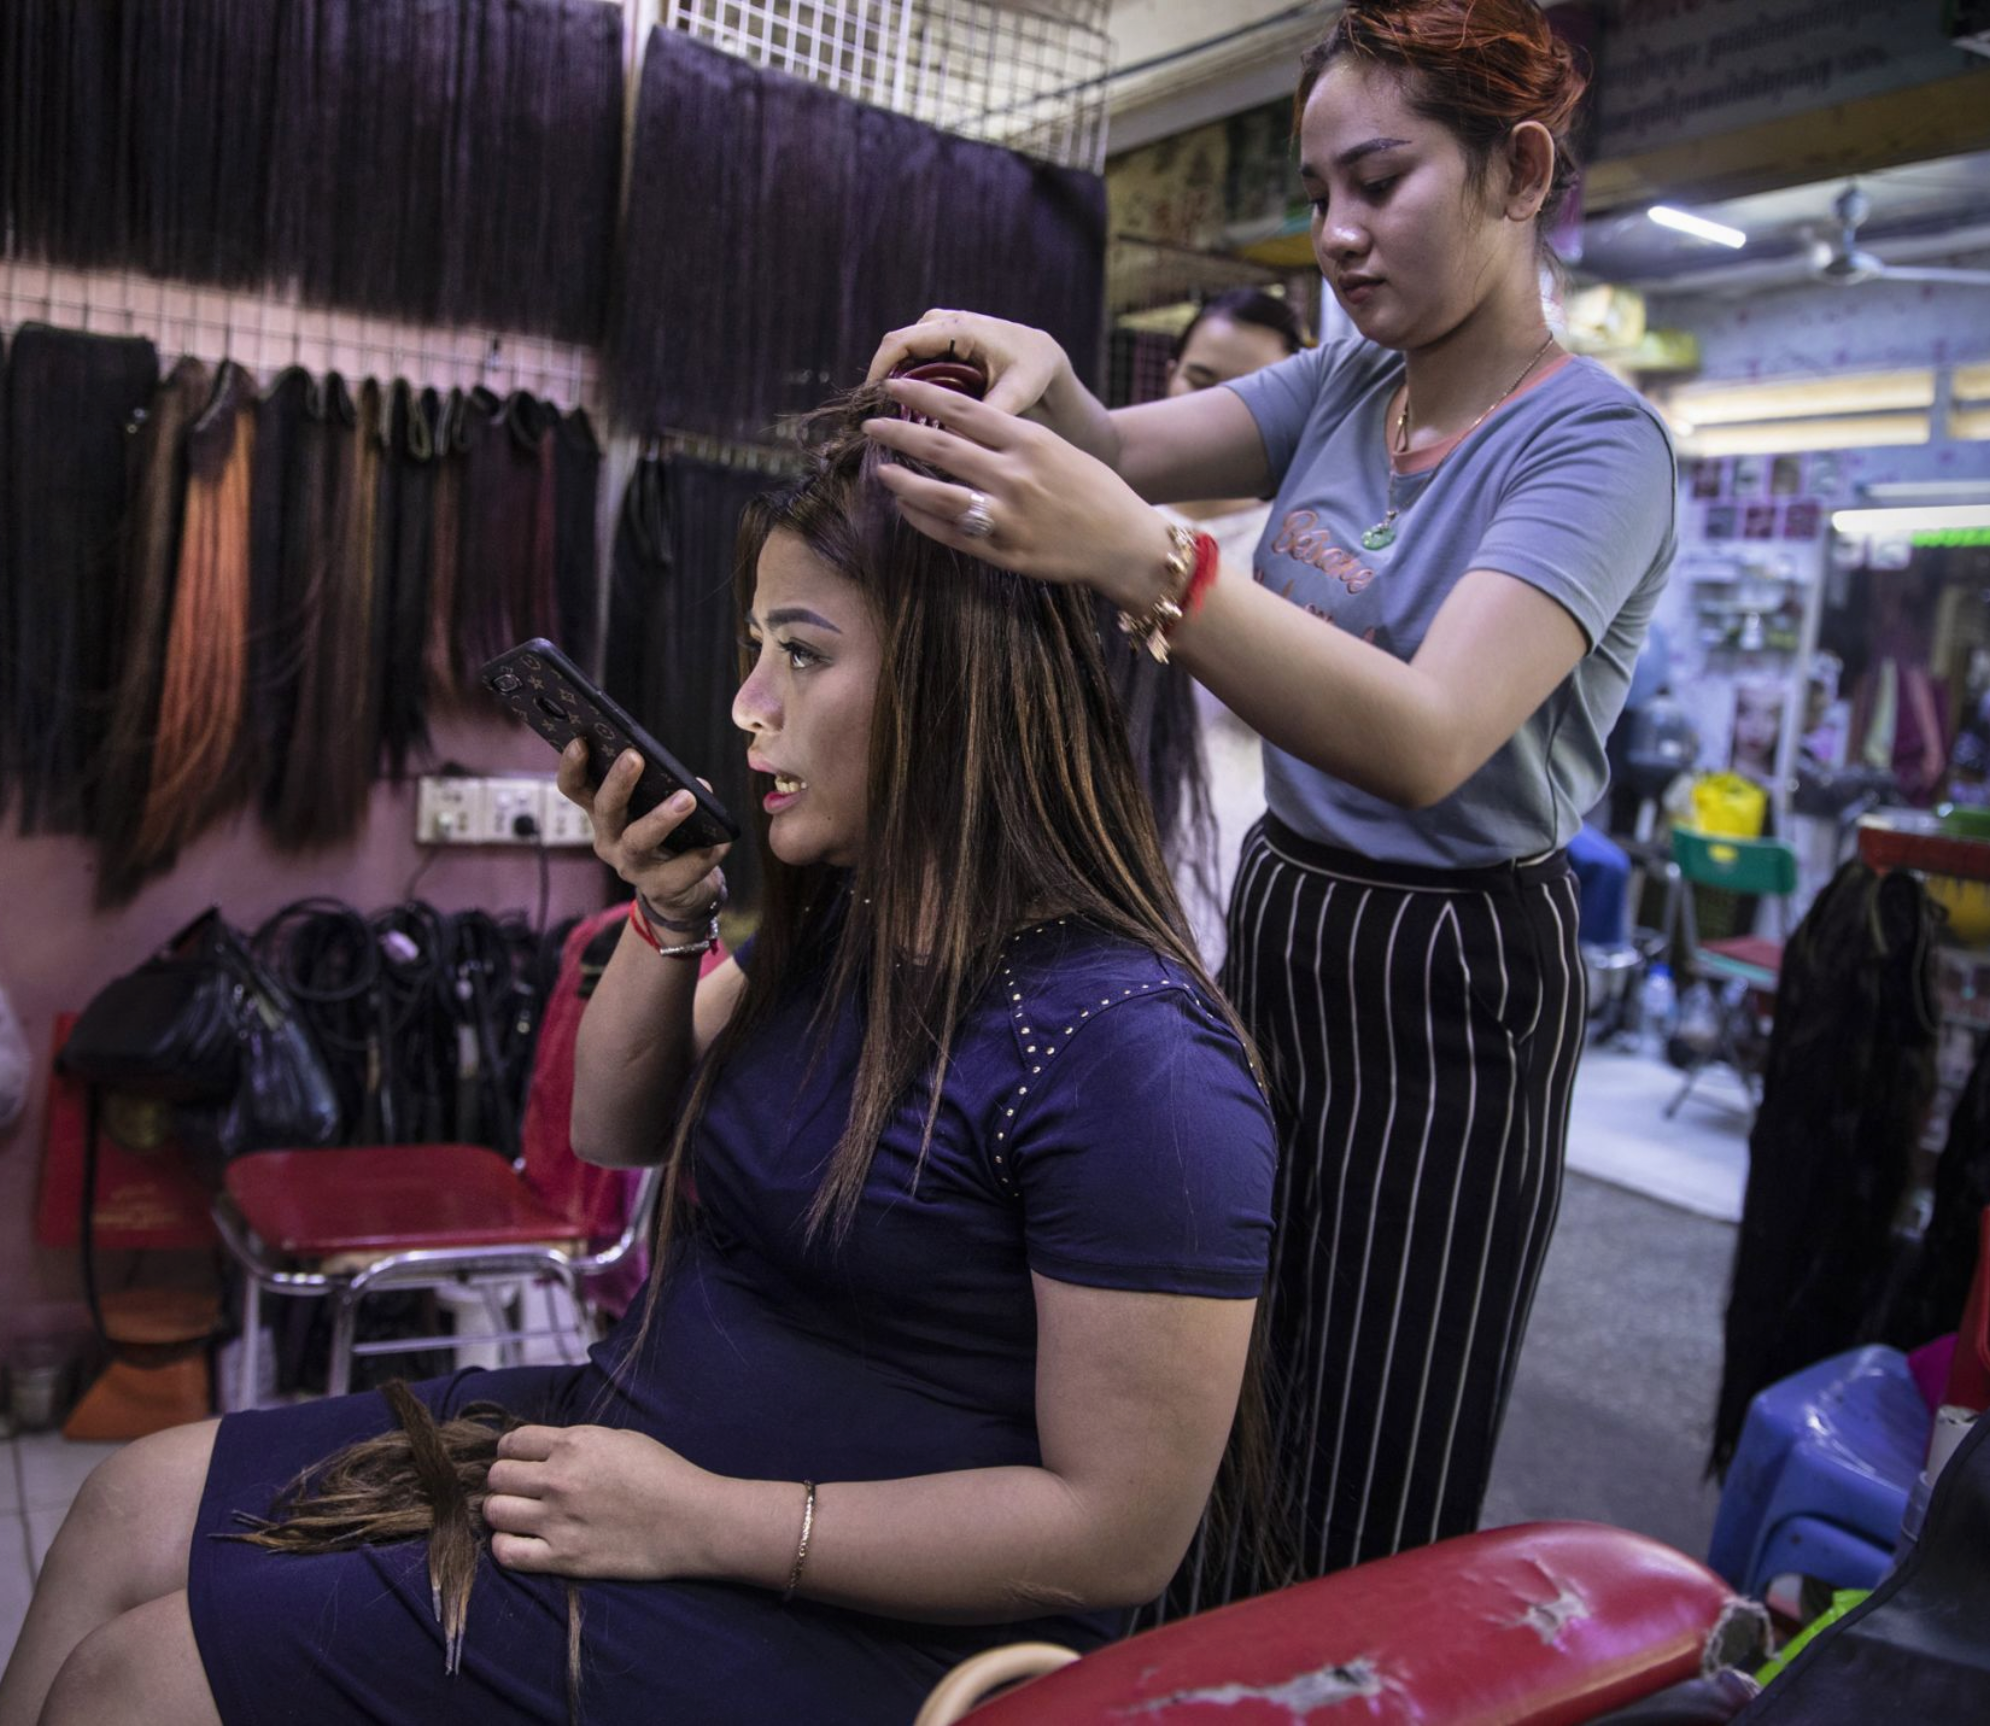 A hairdresser works on a customer at the Orussey shopping complex in Phnom Penh. Image by Paula Bronstein. Cambodia, 2019.